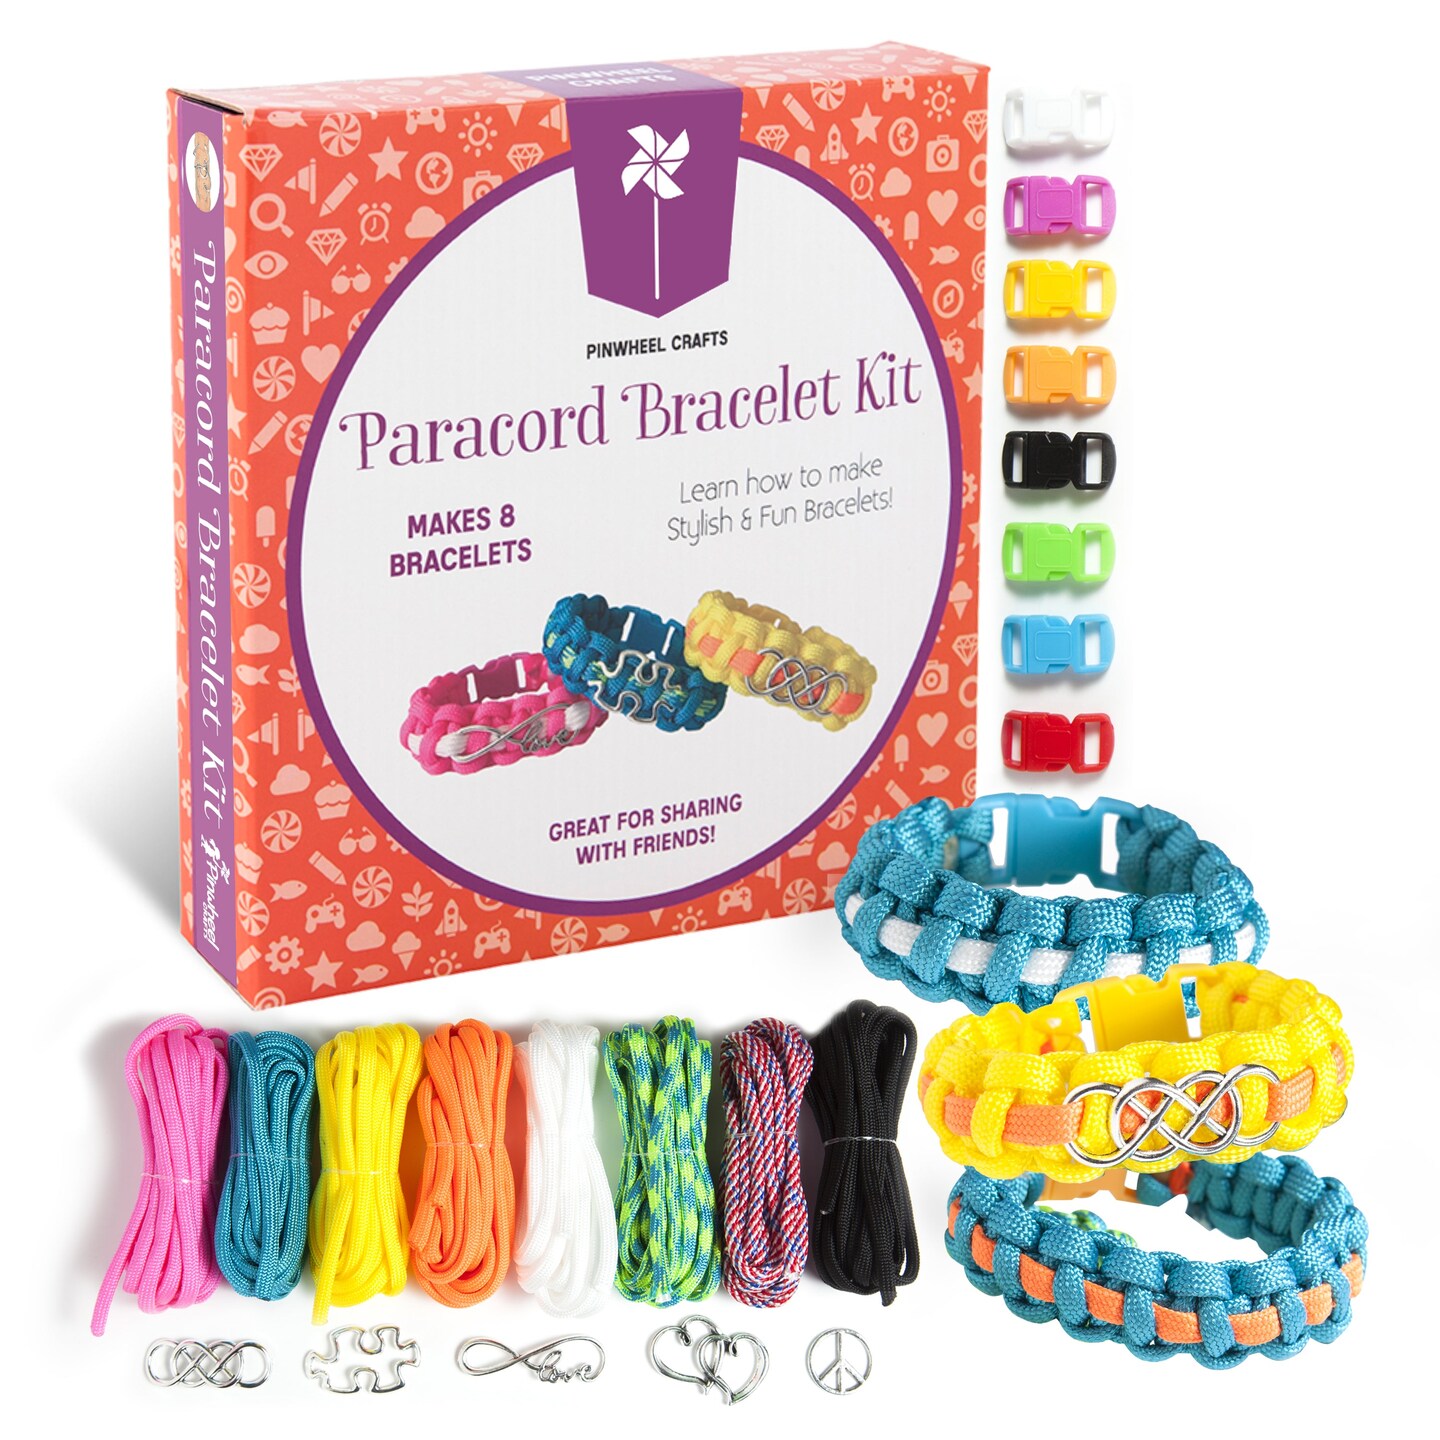 PAXCOO 488Pcs String Bracelet Making Kit, Friendship Bracelet String Kit  with 50 Skeins Embroidery Floss Cross Stitch Thread, 400Pcs Friendship  Bracelet Beads, 37Pcs Embroidery Tools and Storage Box | Michaels